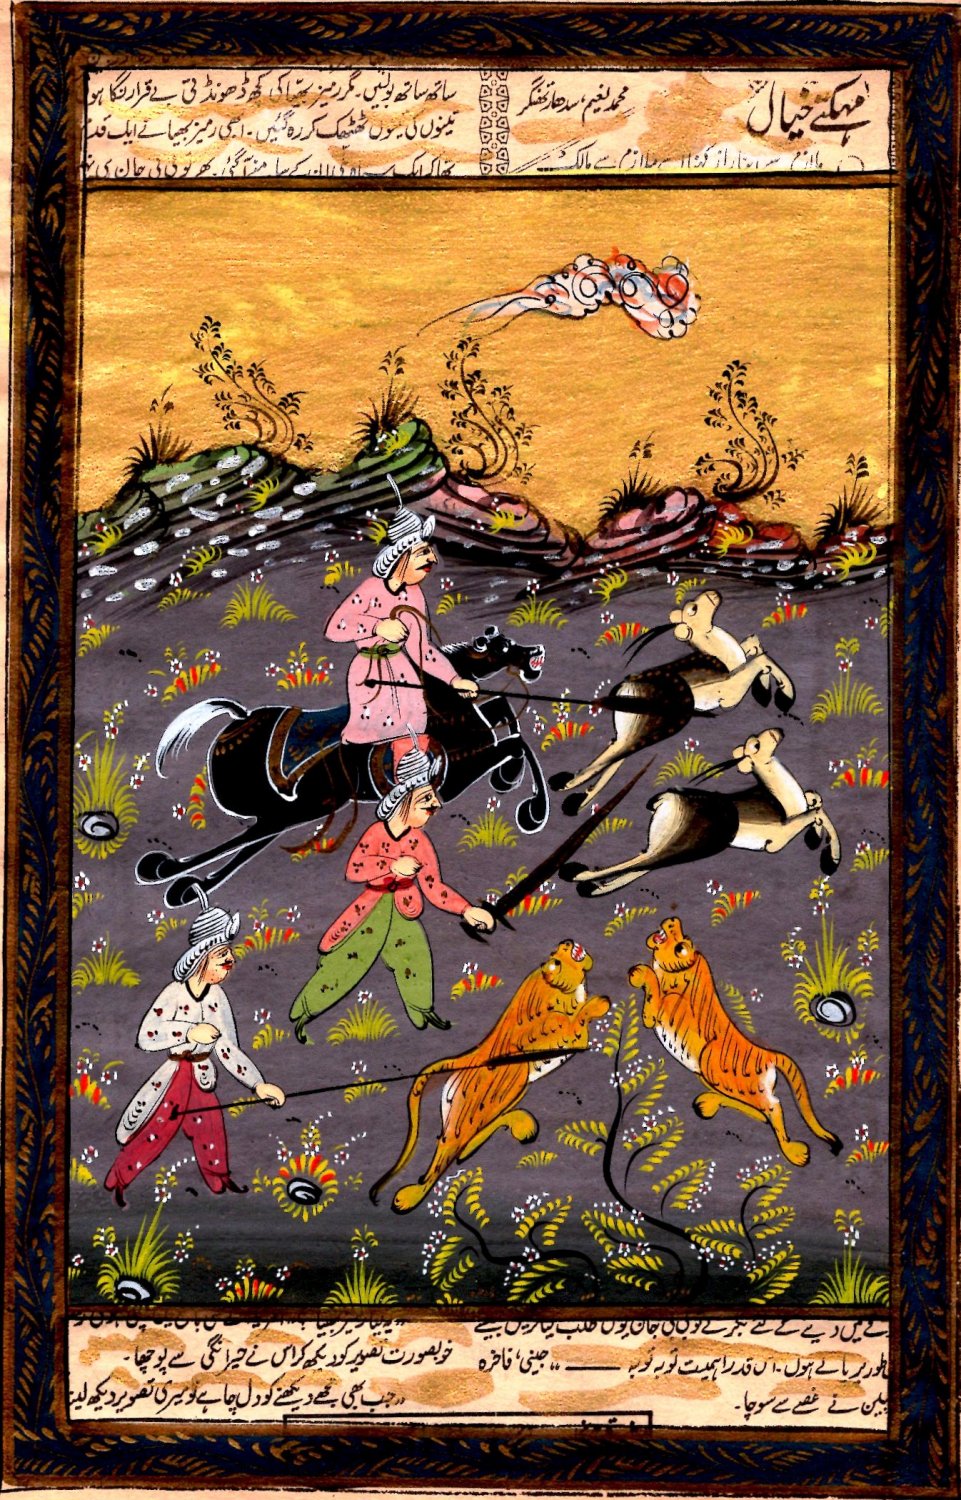 Handcrafted Indian Miniature Persian Mughal Paintings Contemporary Revival Art